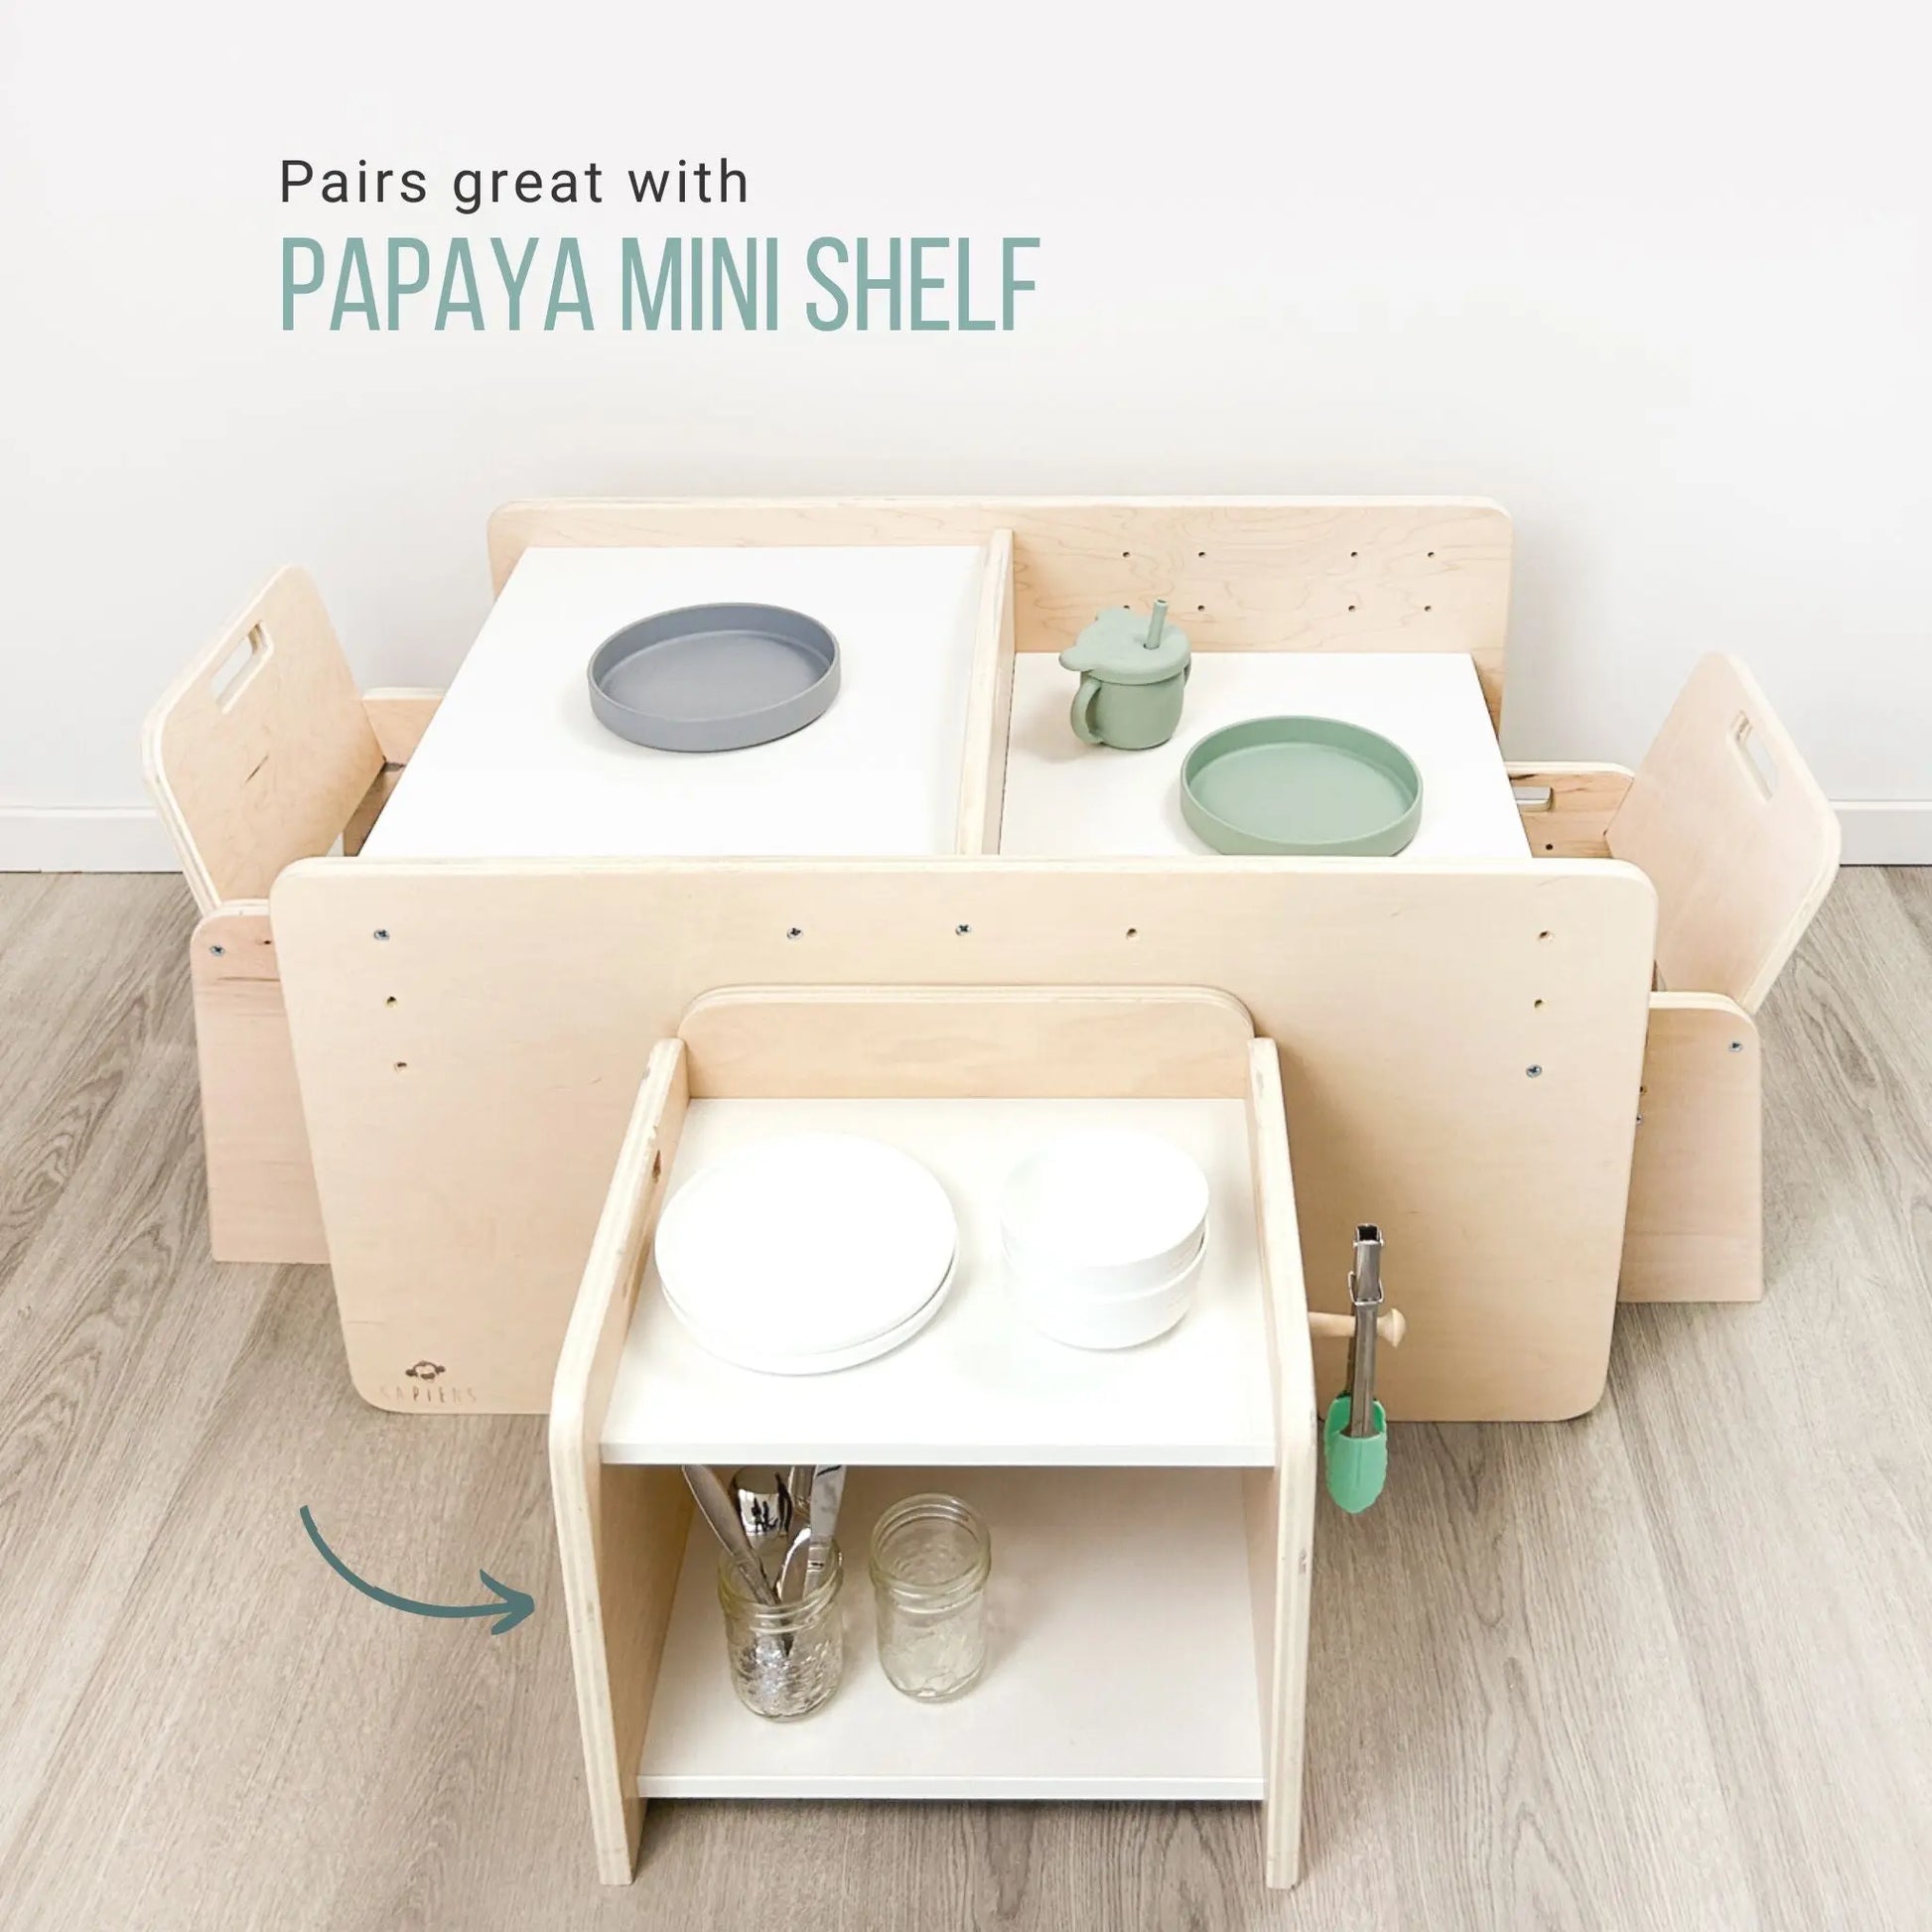 PAPAYA DOUBLE - Adjustable Table & Chair Set for Two Sapiens Child